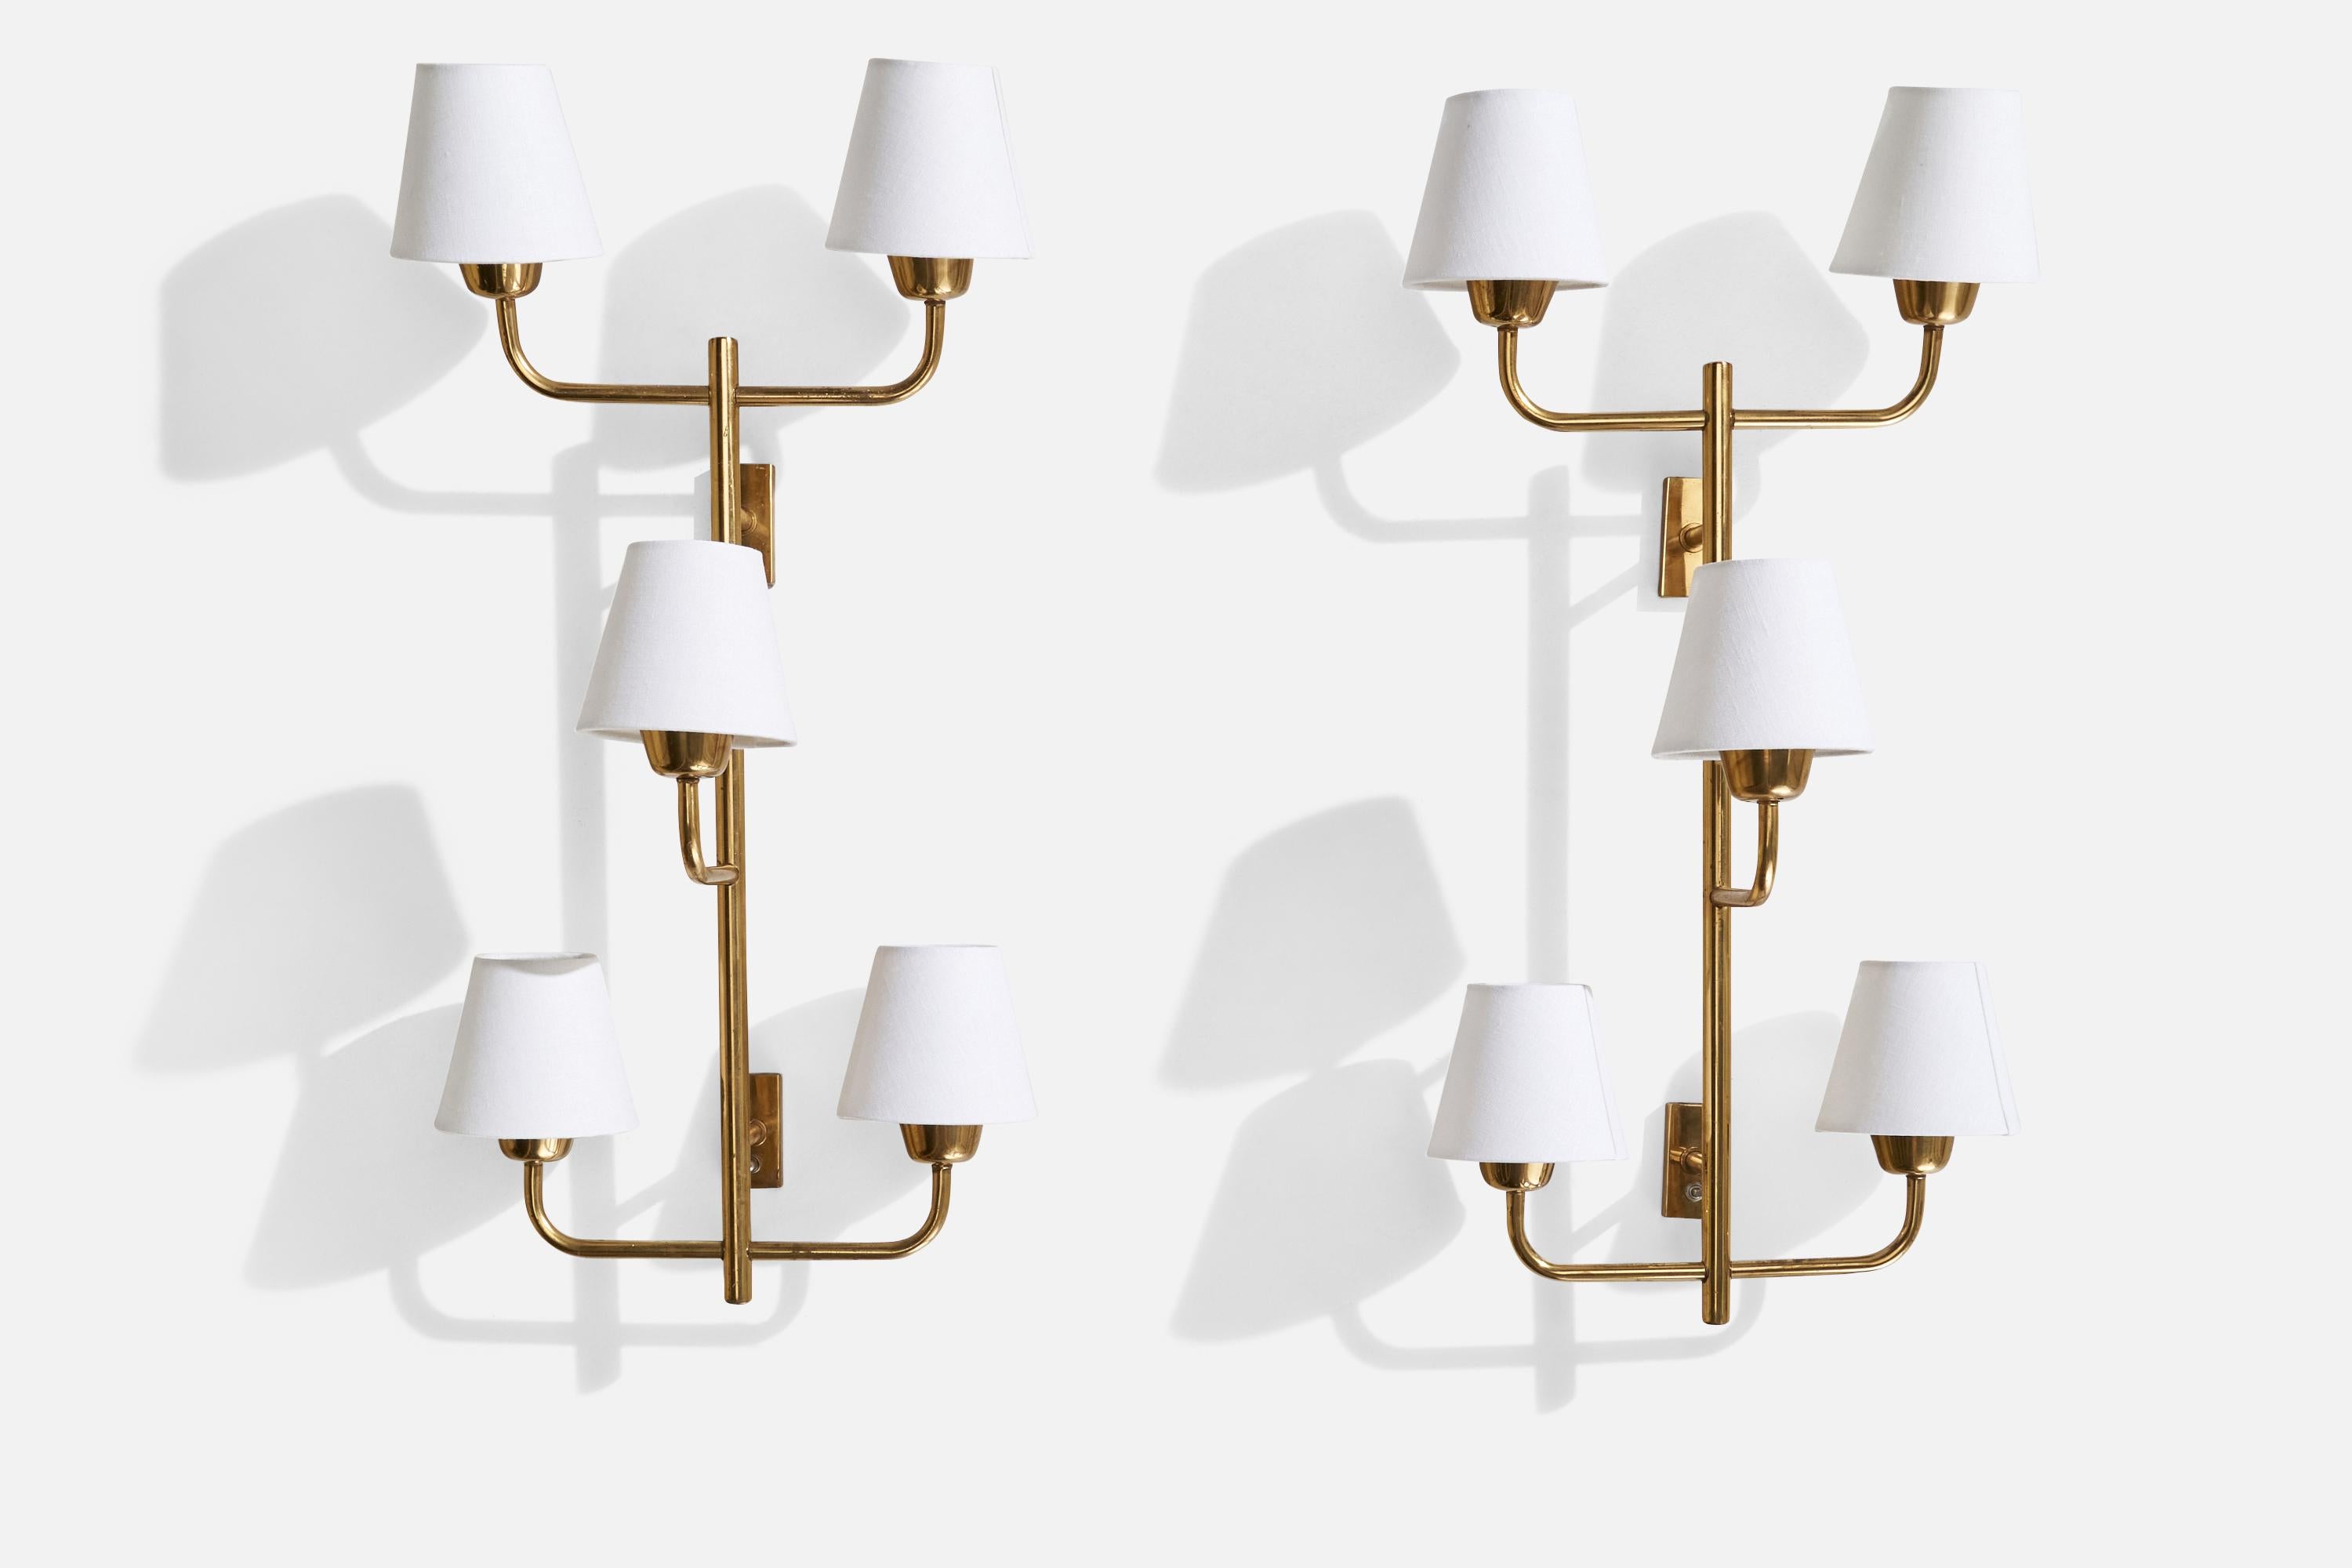 A pair of 5-armed brass and white fabric wall lights designed and produced in the US, c. 1960s.

Overall Dimensions (inches): 31.25” H x 15” W x 9” D
Back Plate Dimensions (inches): 3.08” H x 1.50” W x 0.50” D
Bulb Specifications: E-26 Bulb
Number